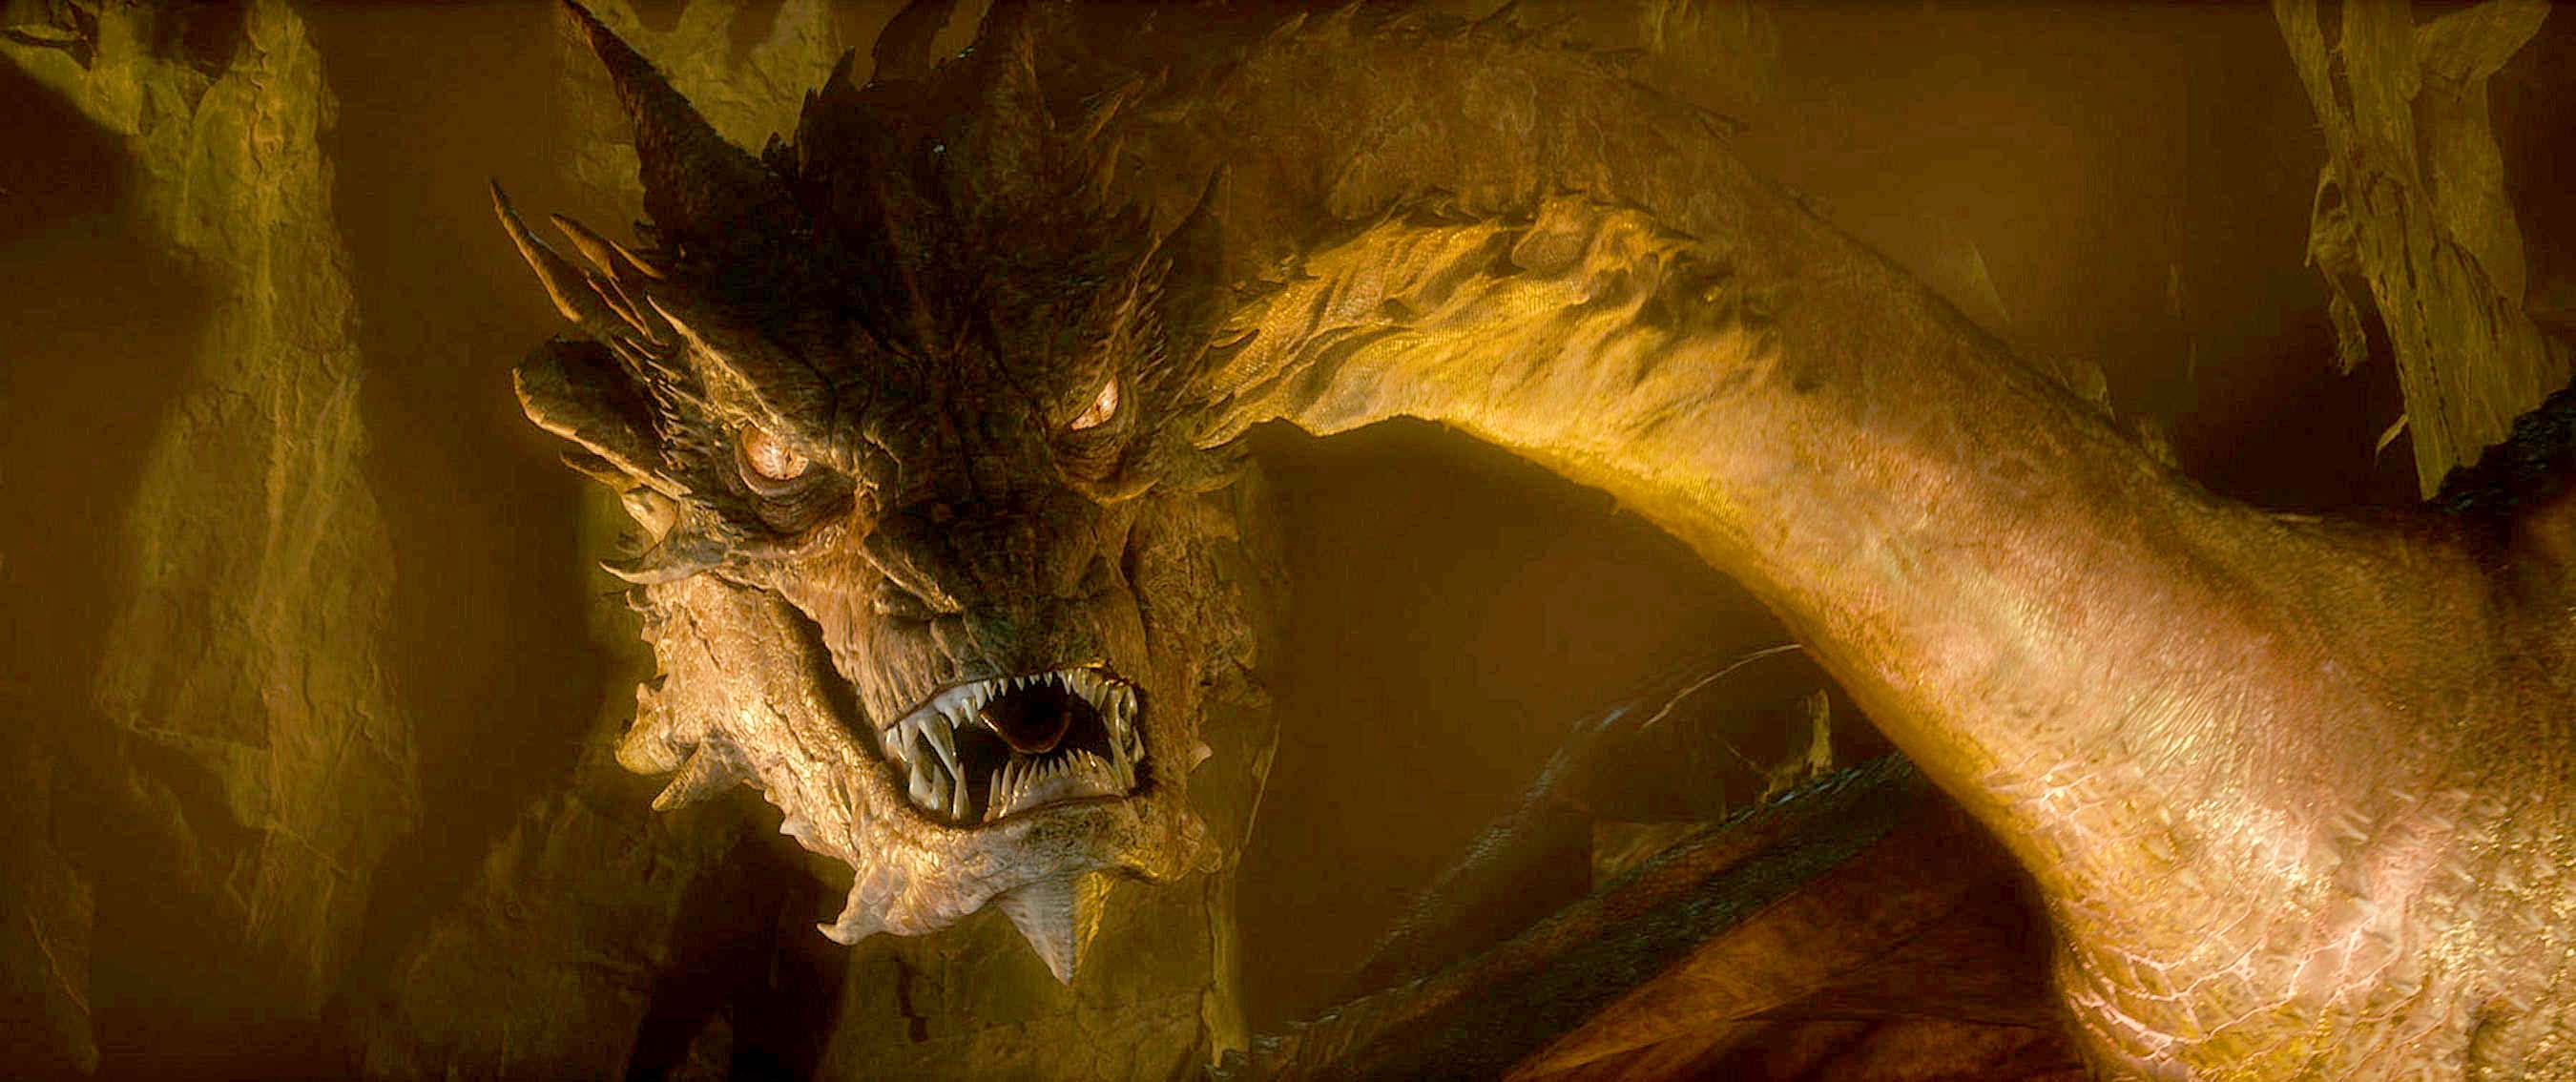 Smaug-the-Dragon-voiced-by-Benedict-Cumberbatch.jpg